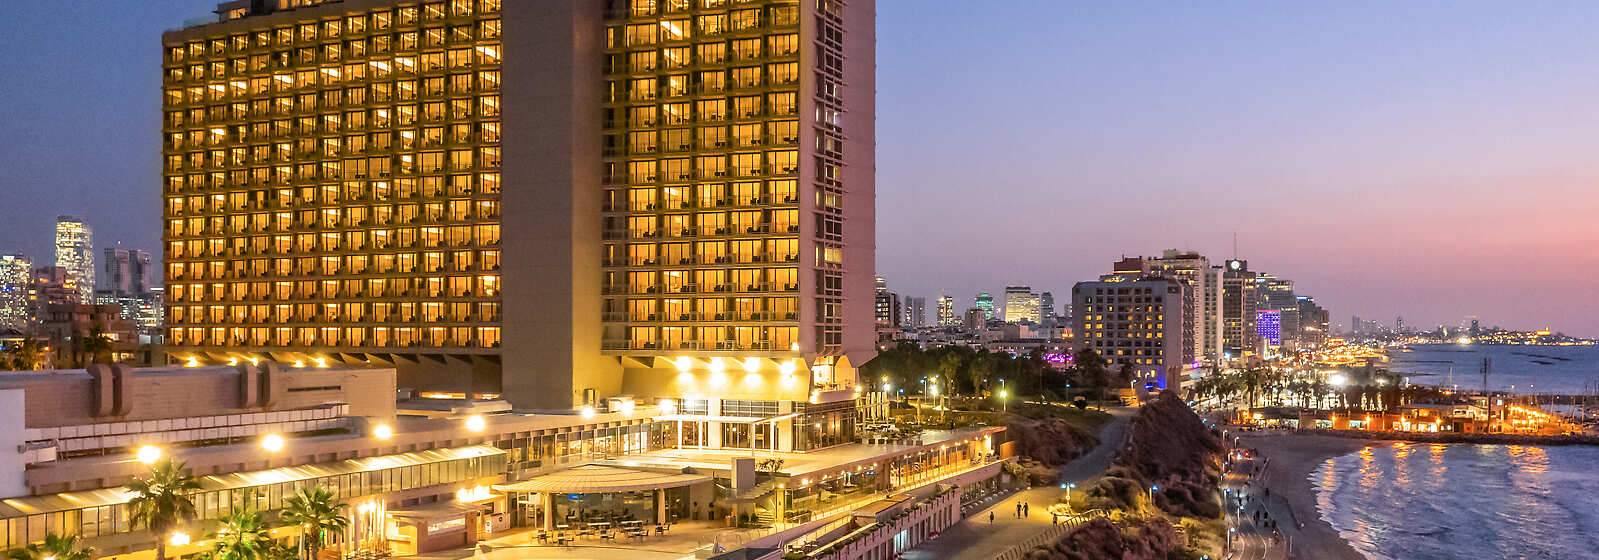 Hilton Tel Aviv at sunset: rooms with sea views, iconic hotel, outdoor pool, and beach minutes away – pure elegance.